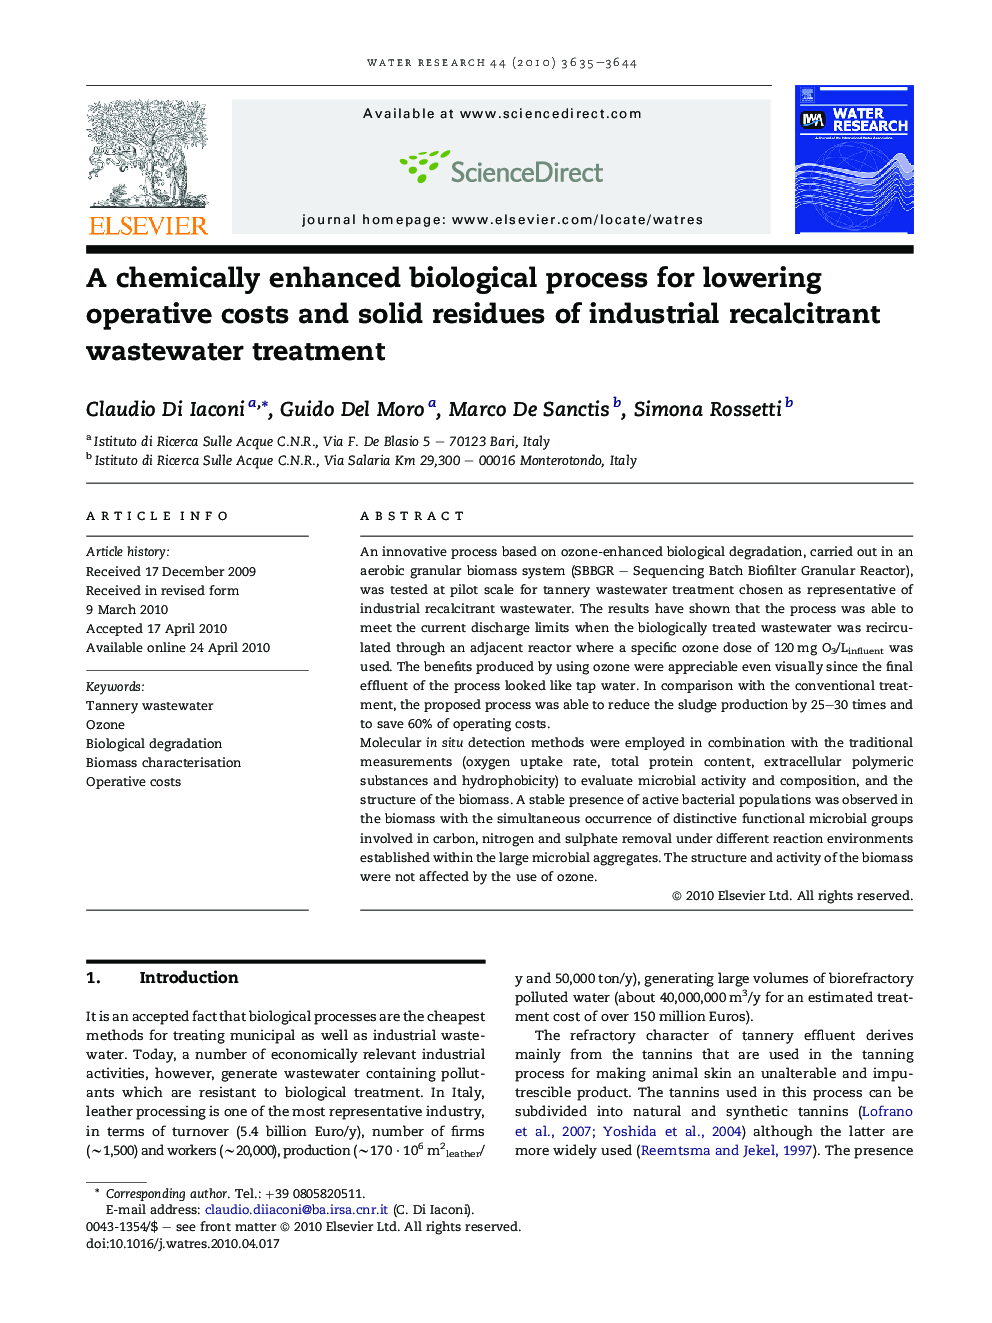 A chemically enhanced biological process for lowering operative costs and solid residues of industrial recalcitrant wastewater treatment